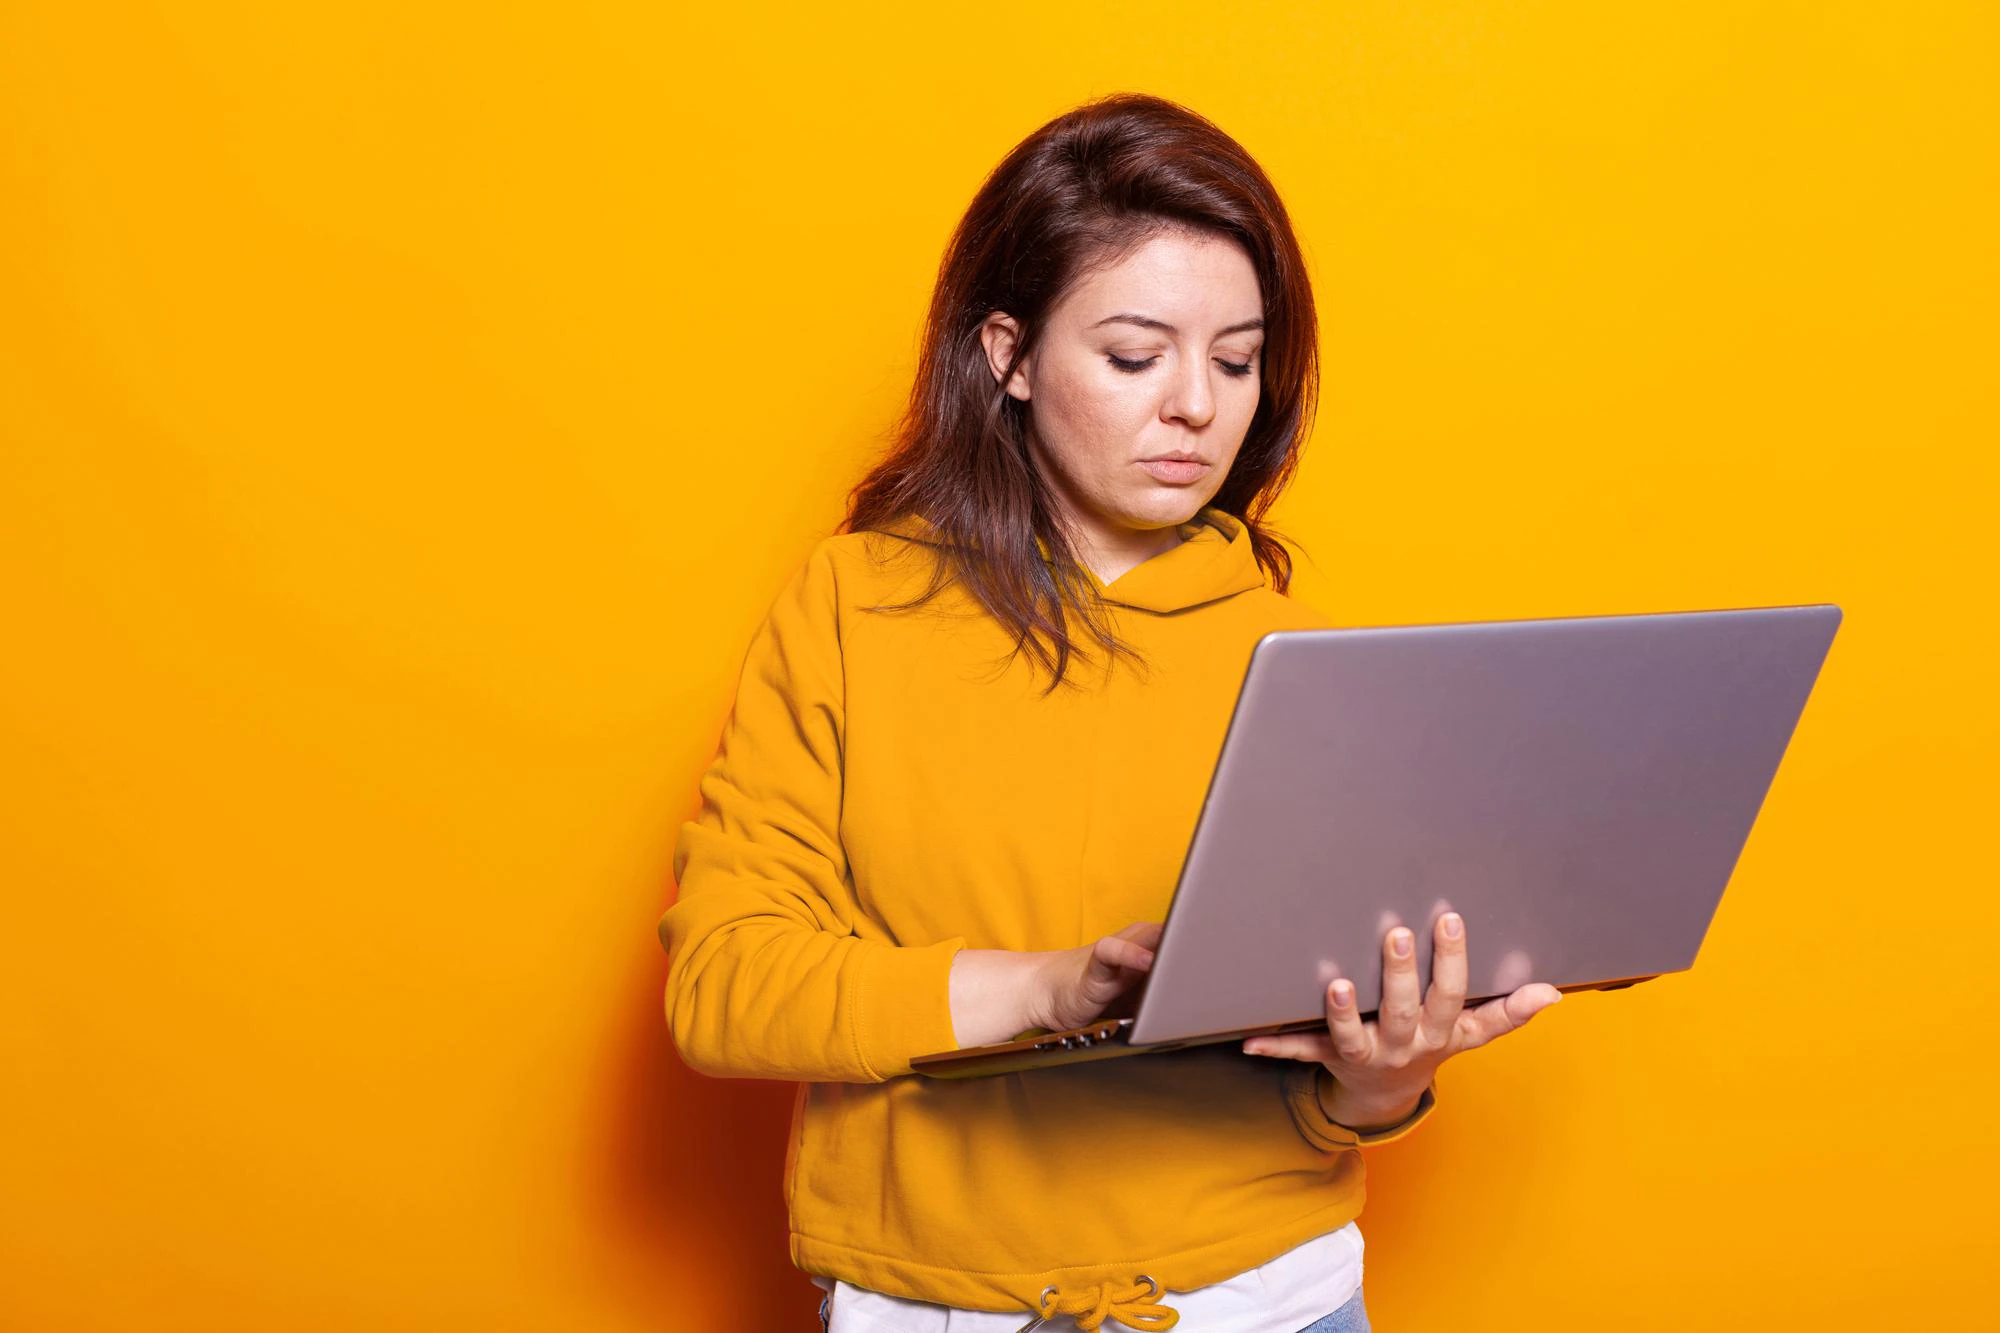 modern person holding laptop use technology camera studio portrait young woman looking digital device screen working online while standing isolated background 482257 28871